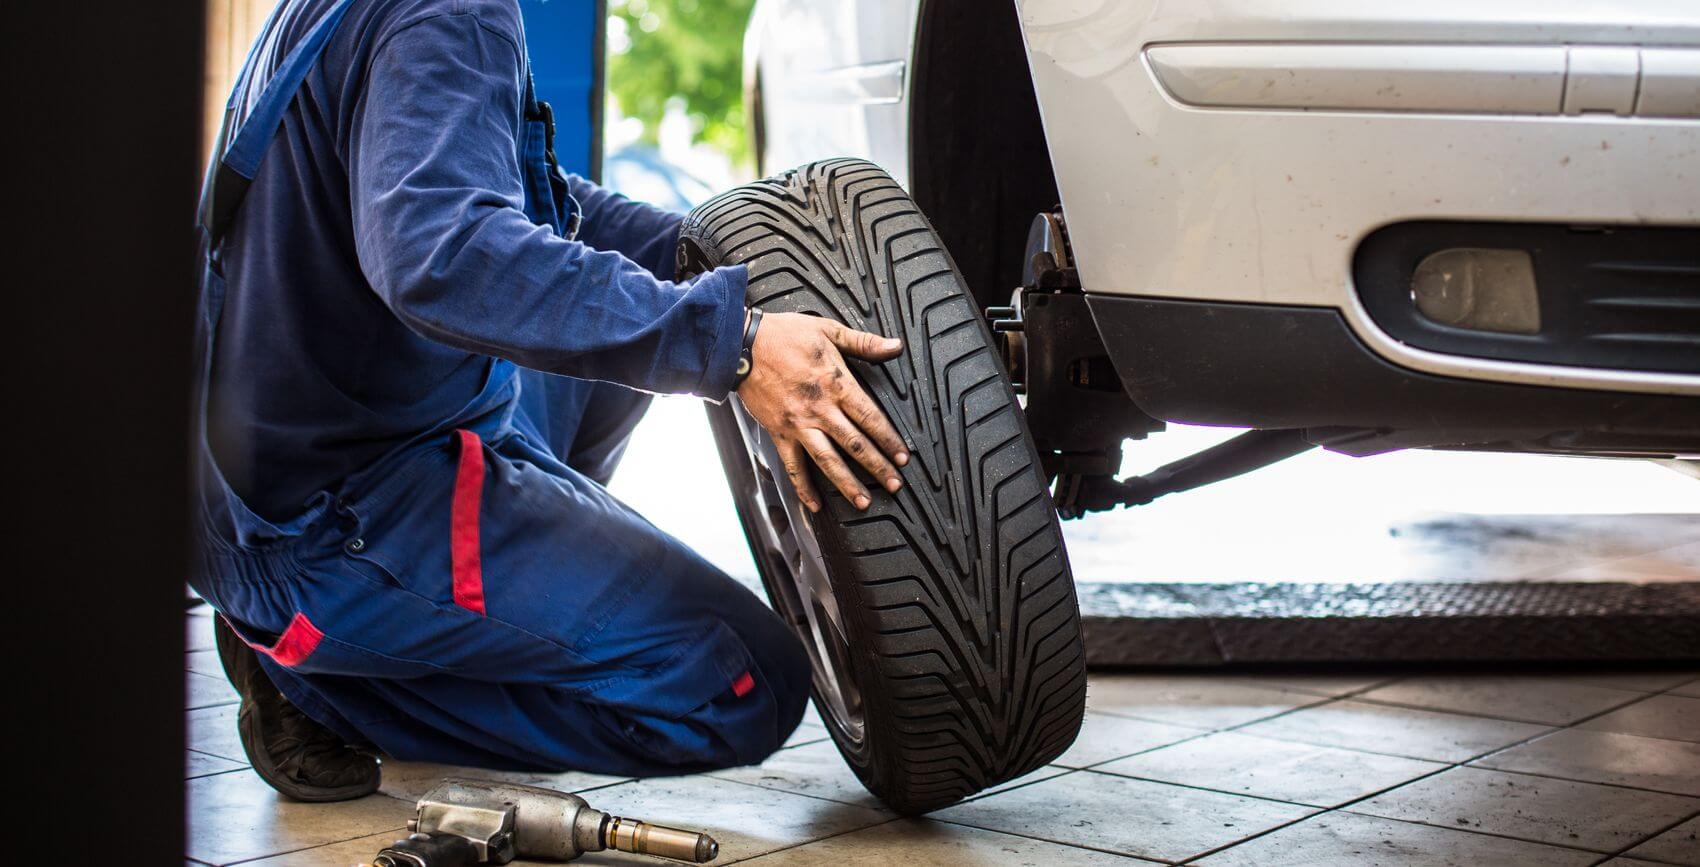 Our experts will handle your tires with care